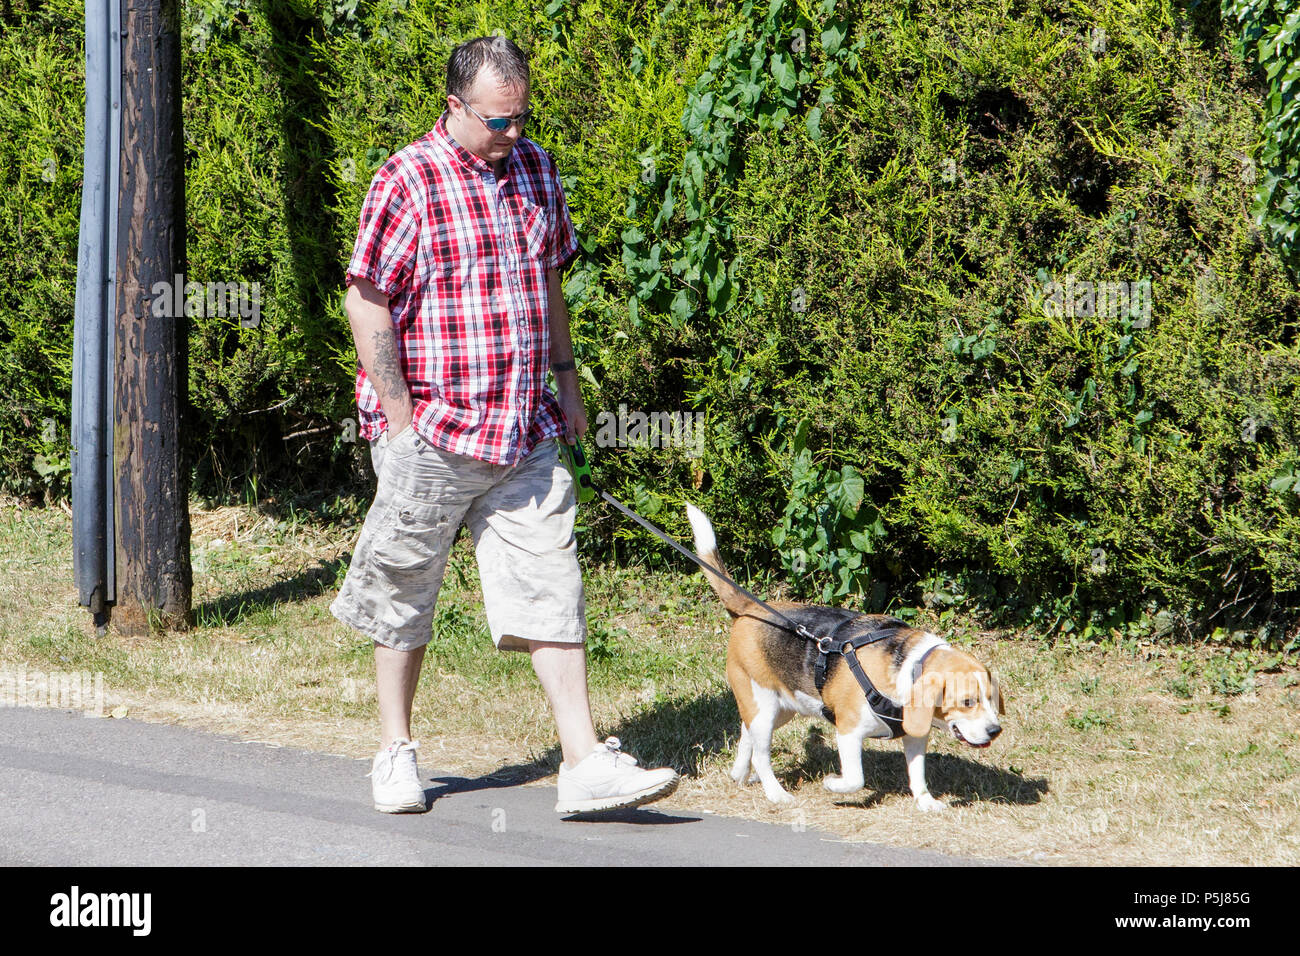 Chippenham, UK, 27th June, 2018. As the UK continues to enjoy the very warm weather, dog walkers are pictured as they take their pets for an early morning walk. Health warnings have been issued as temperatures were forecast to reach a possible high of 33C on Wednesday. Credit: lynchpics/Alamy Live News Stock Photo